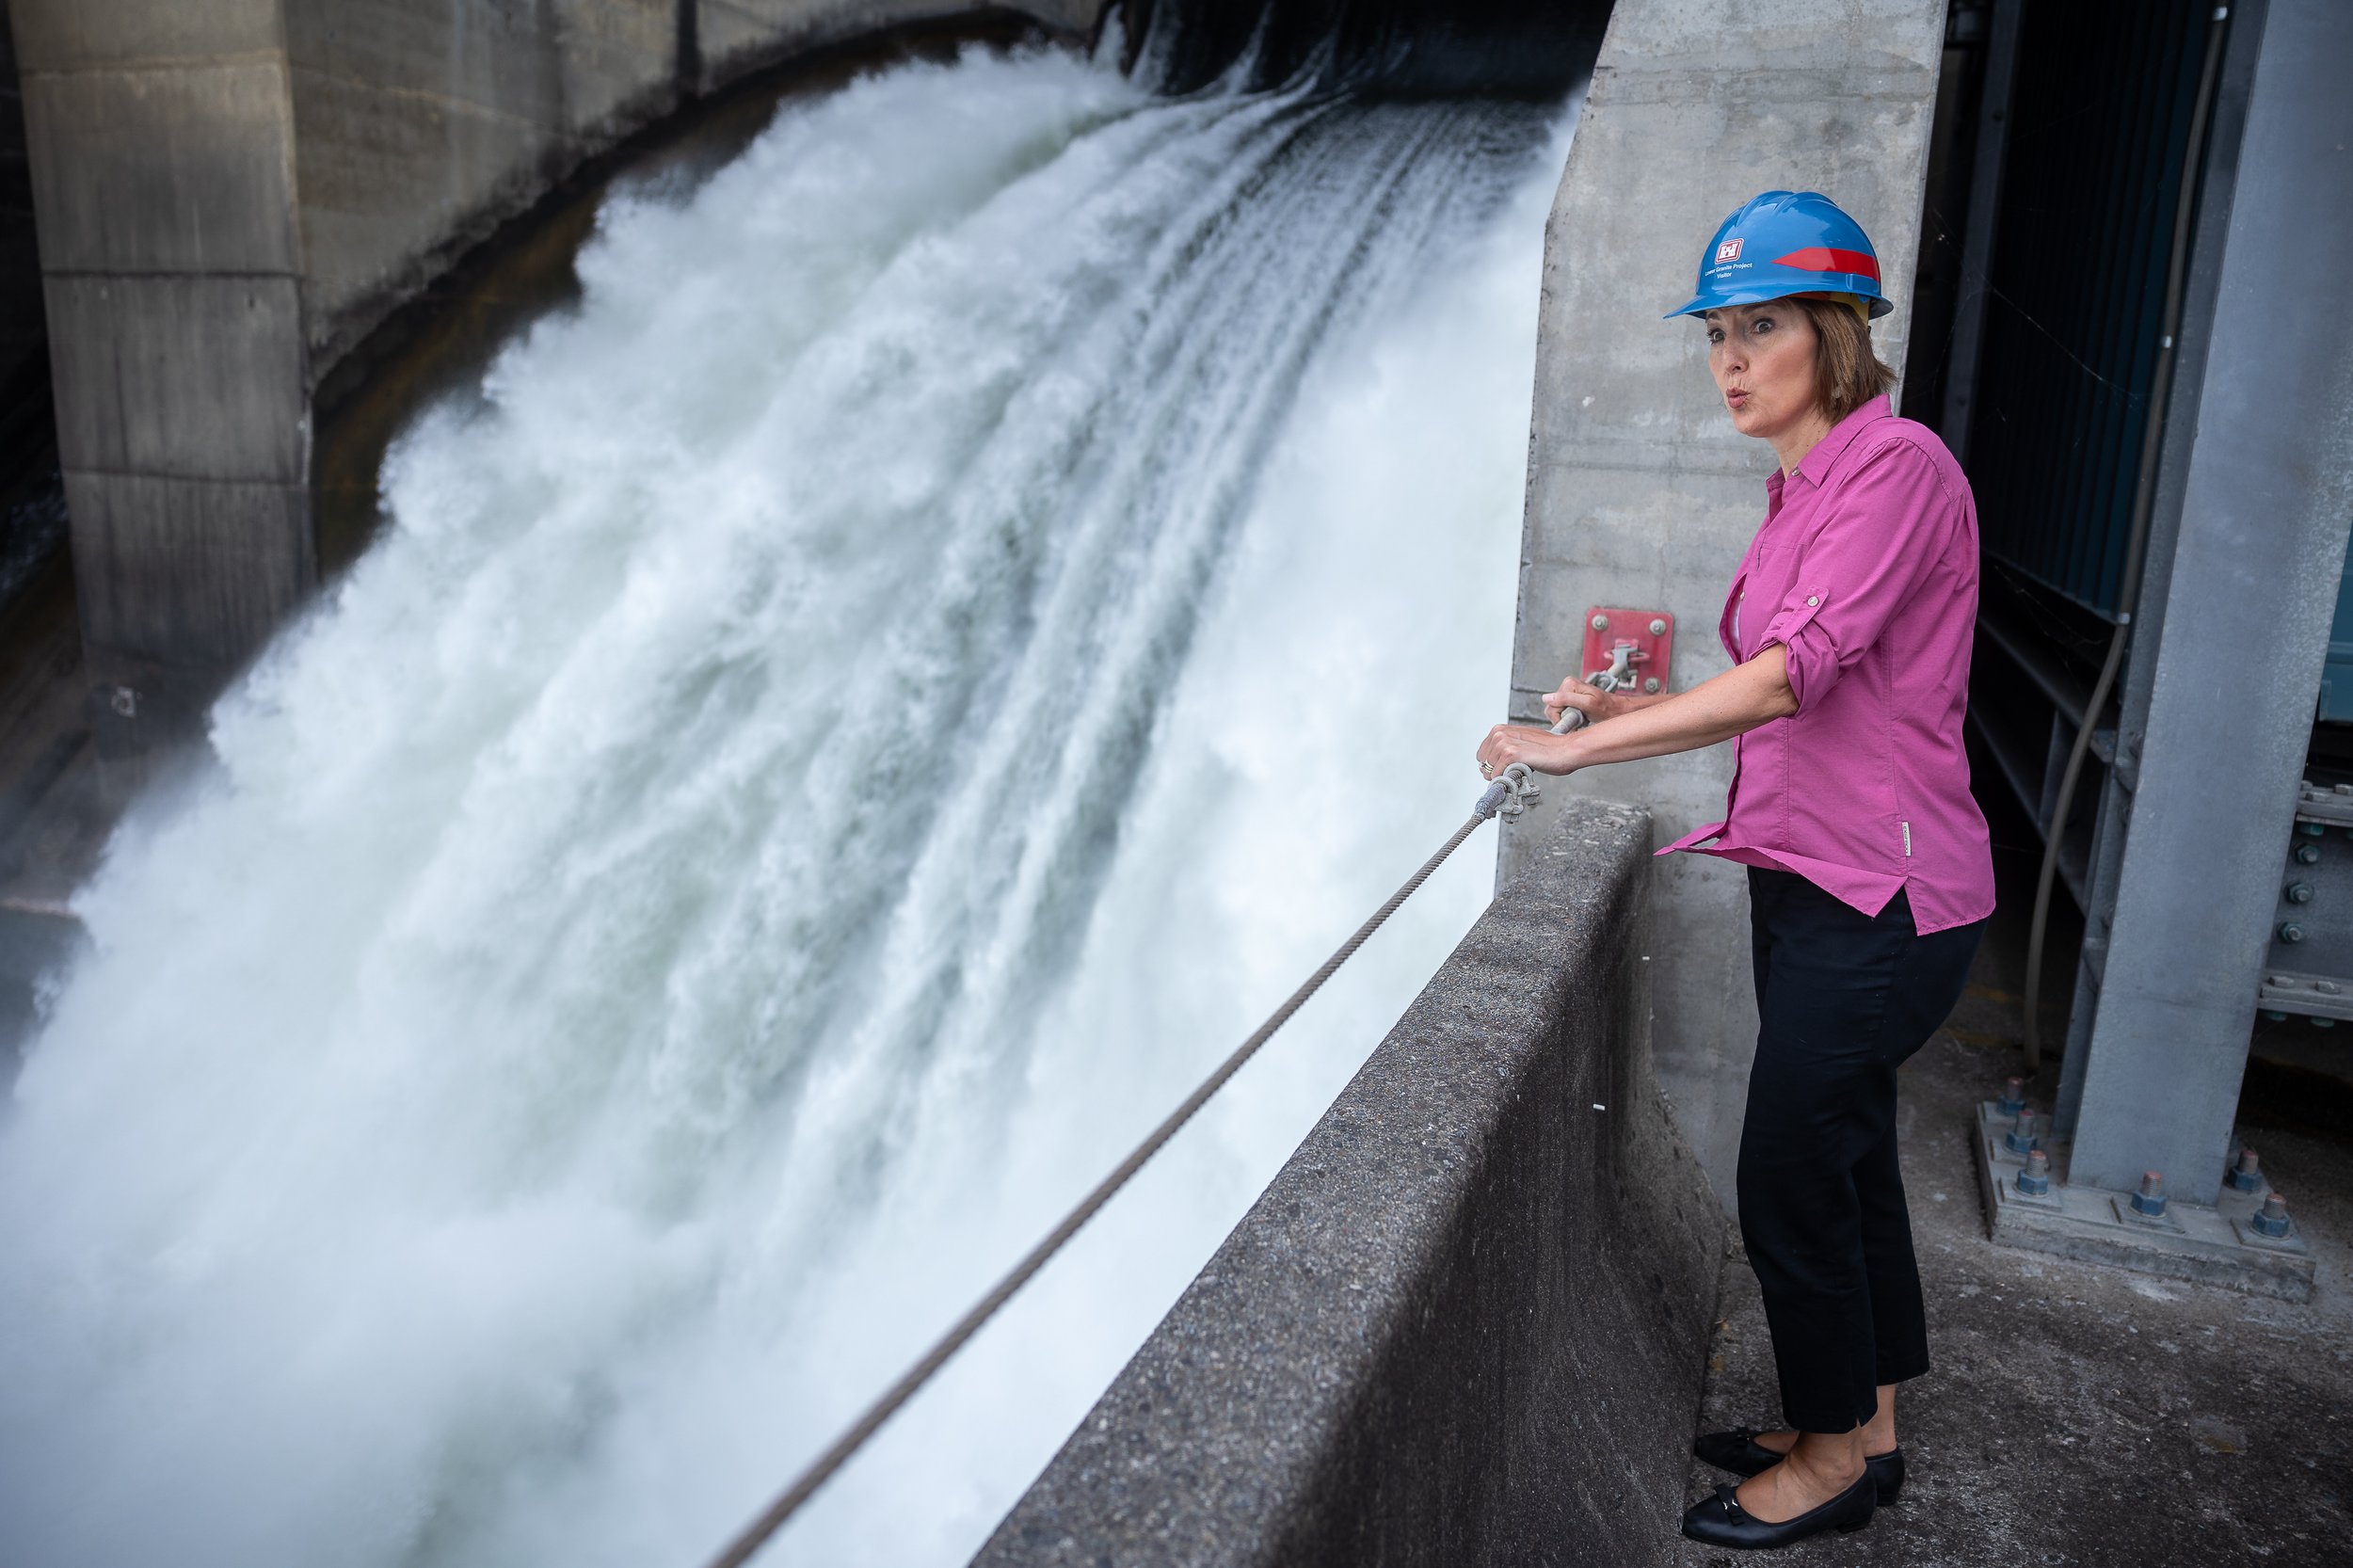  Rep. Cathy McMorris Rodgers (R-Wash.) inspects the Lower Granite Dam on the Snake River near Pomeroy, Wash., Aug. 1, 2022. 